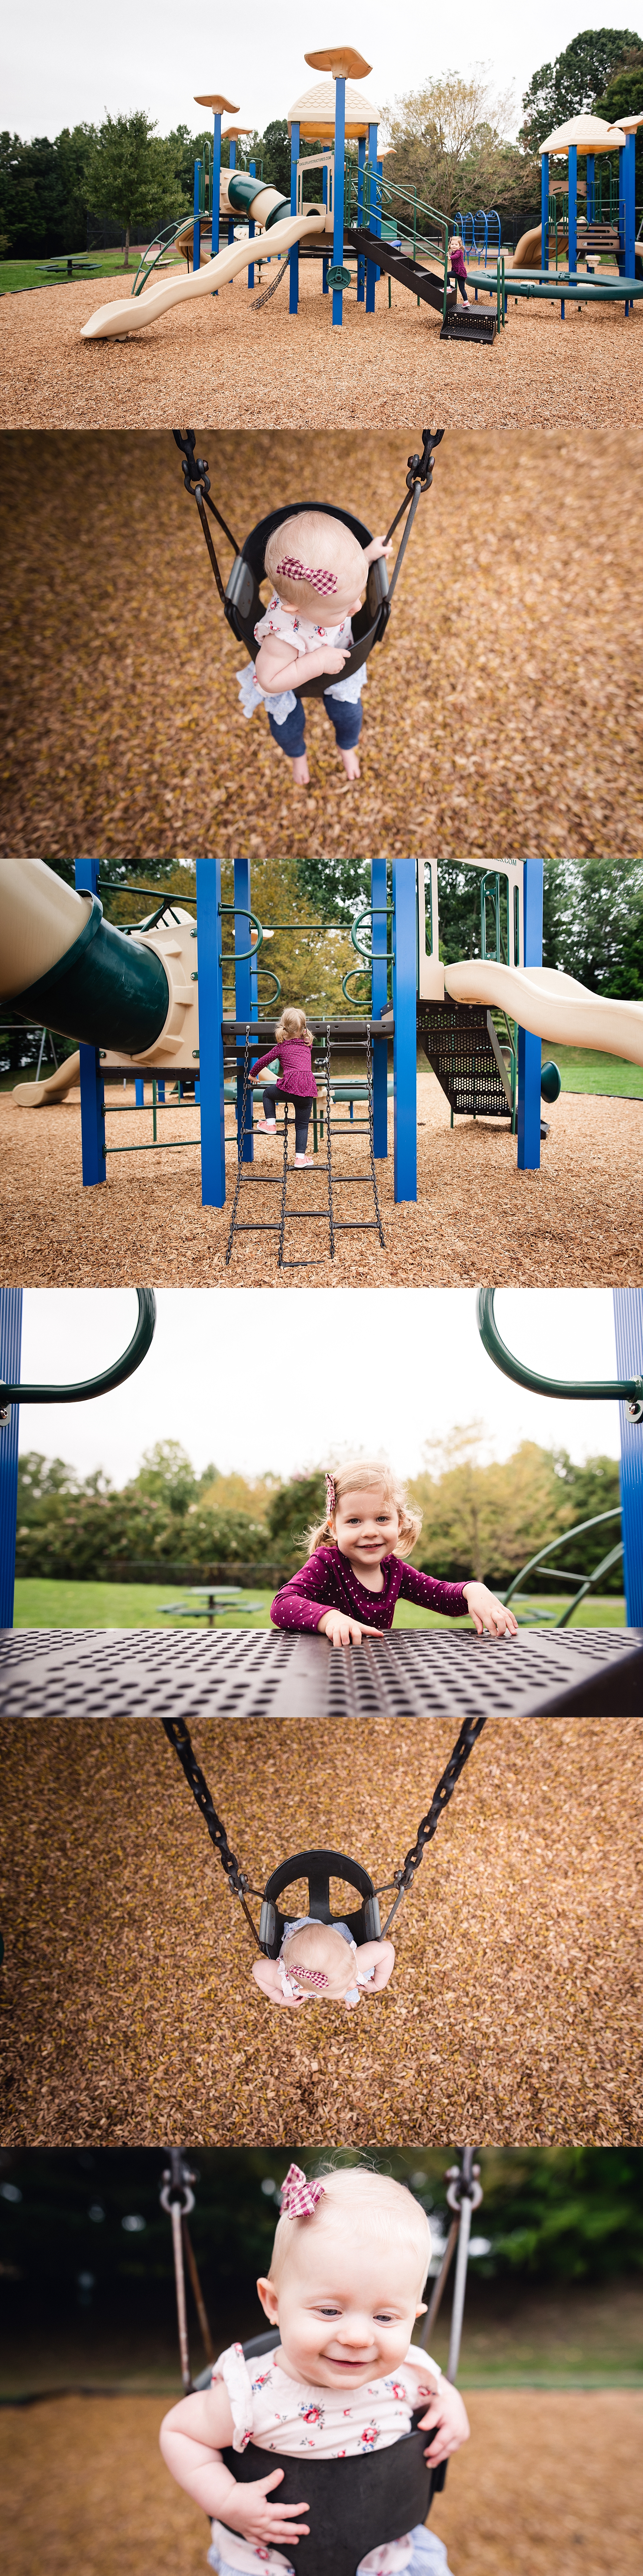 Fresh Autumn Air + First Swing Ride | Bethadilly Photography | www.bethadilly.com